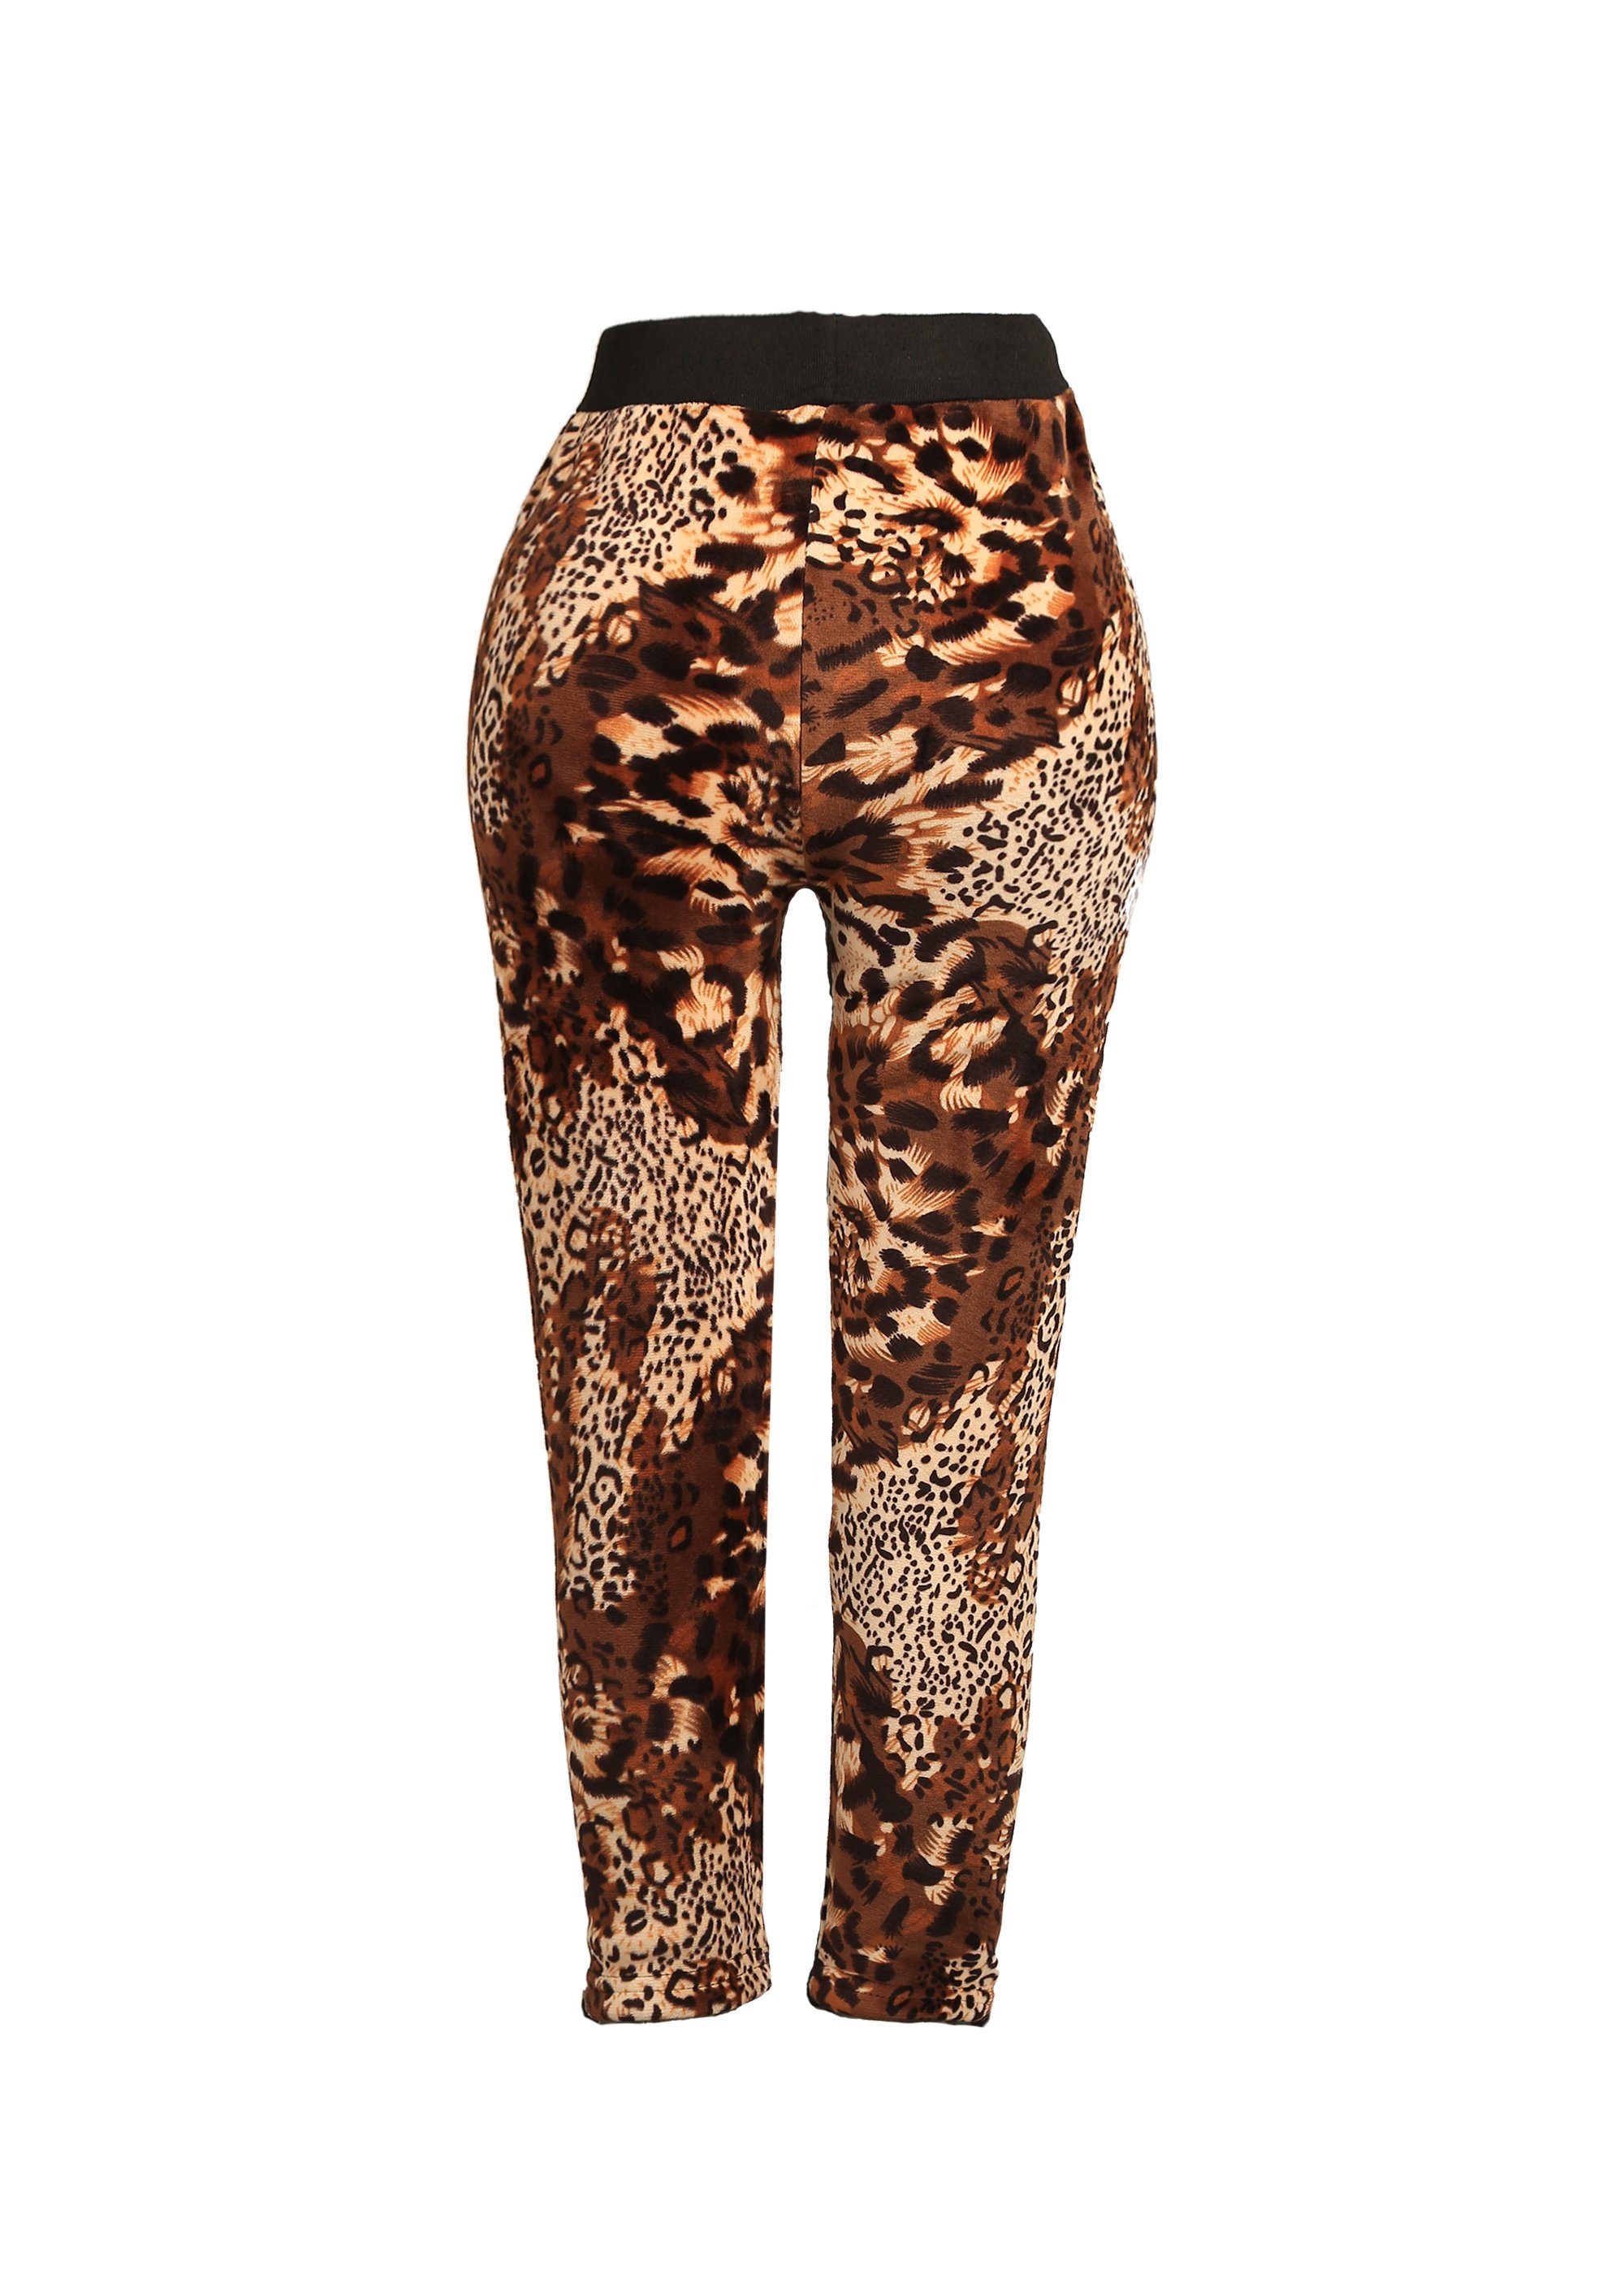 coolem mit Thermoleggings Family Leopardenmuster Trends